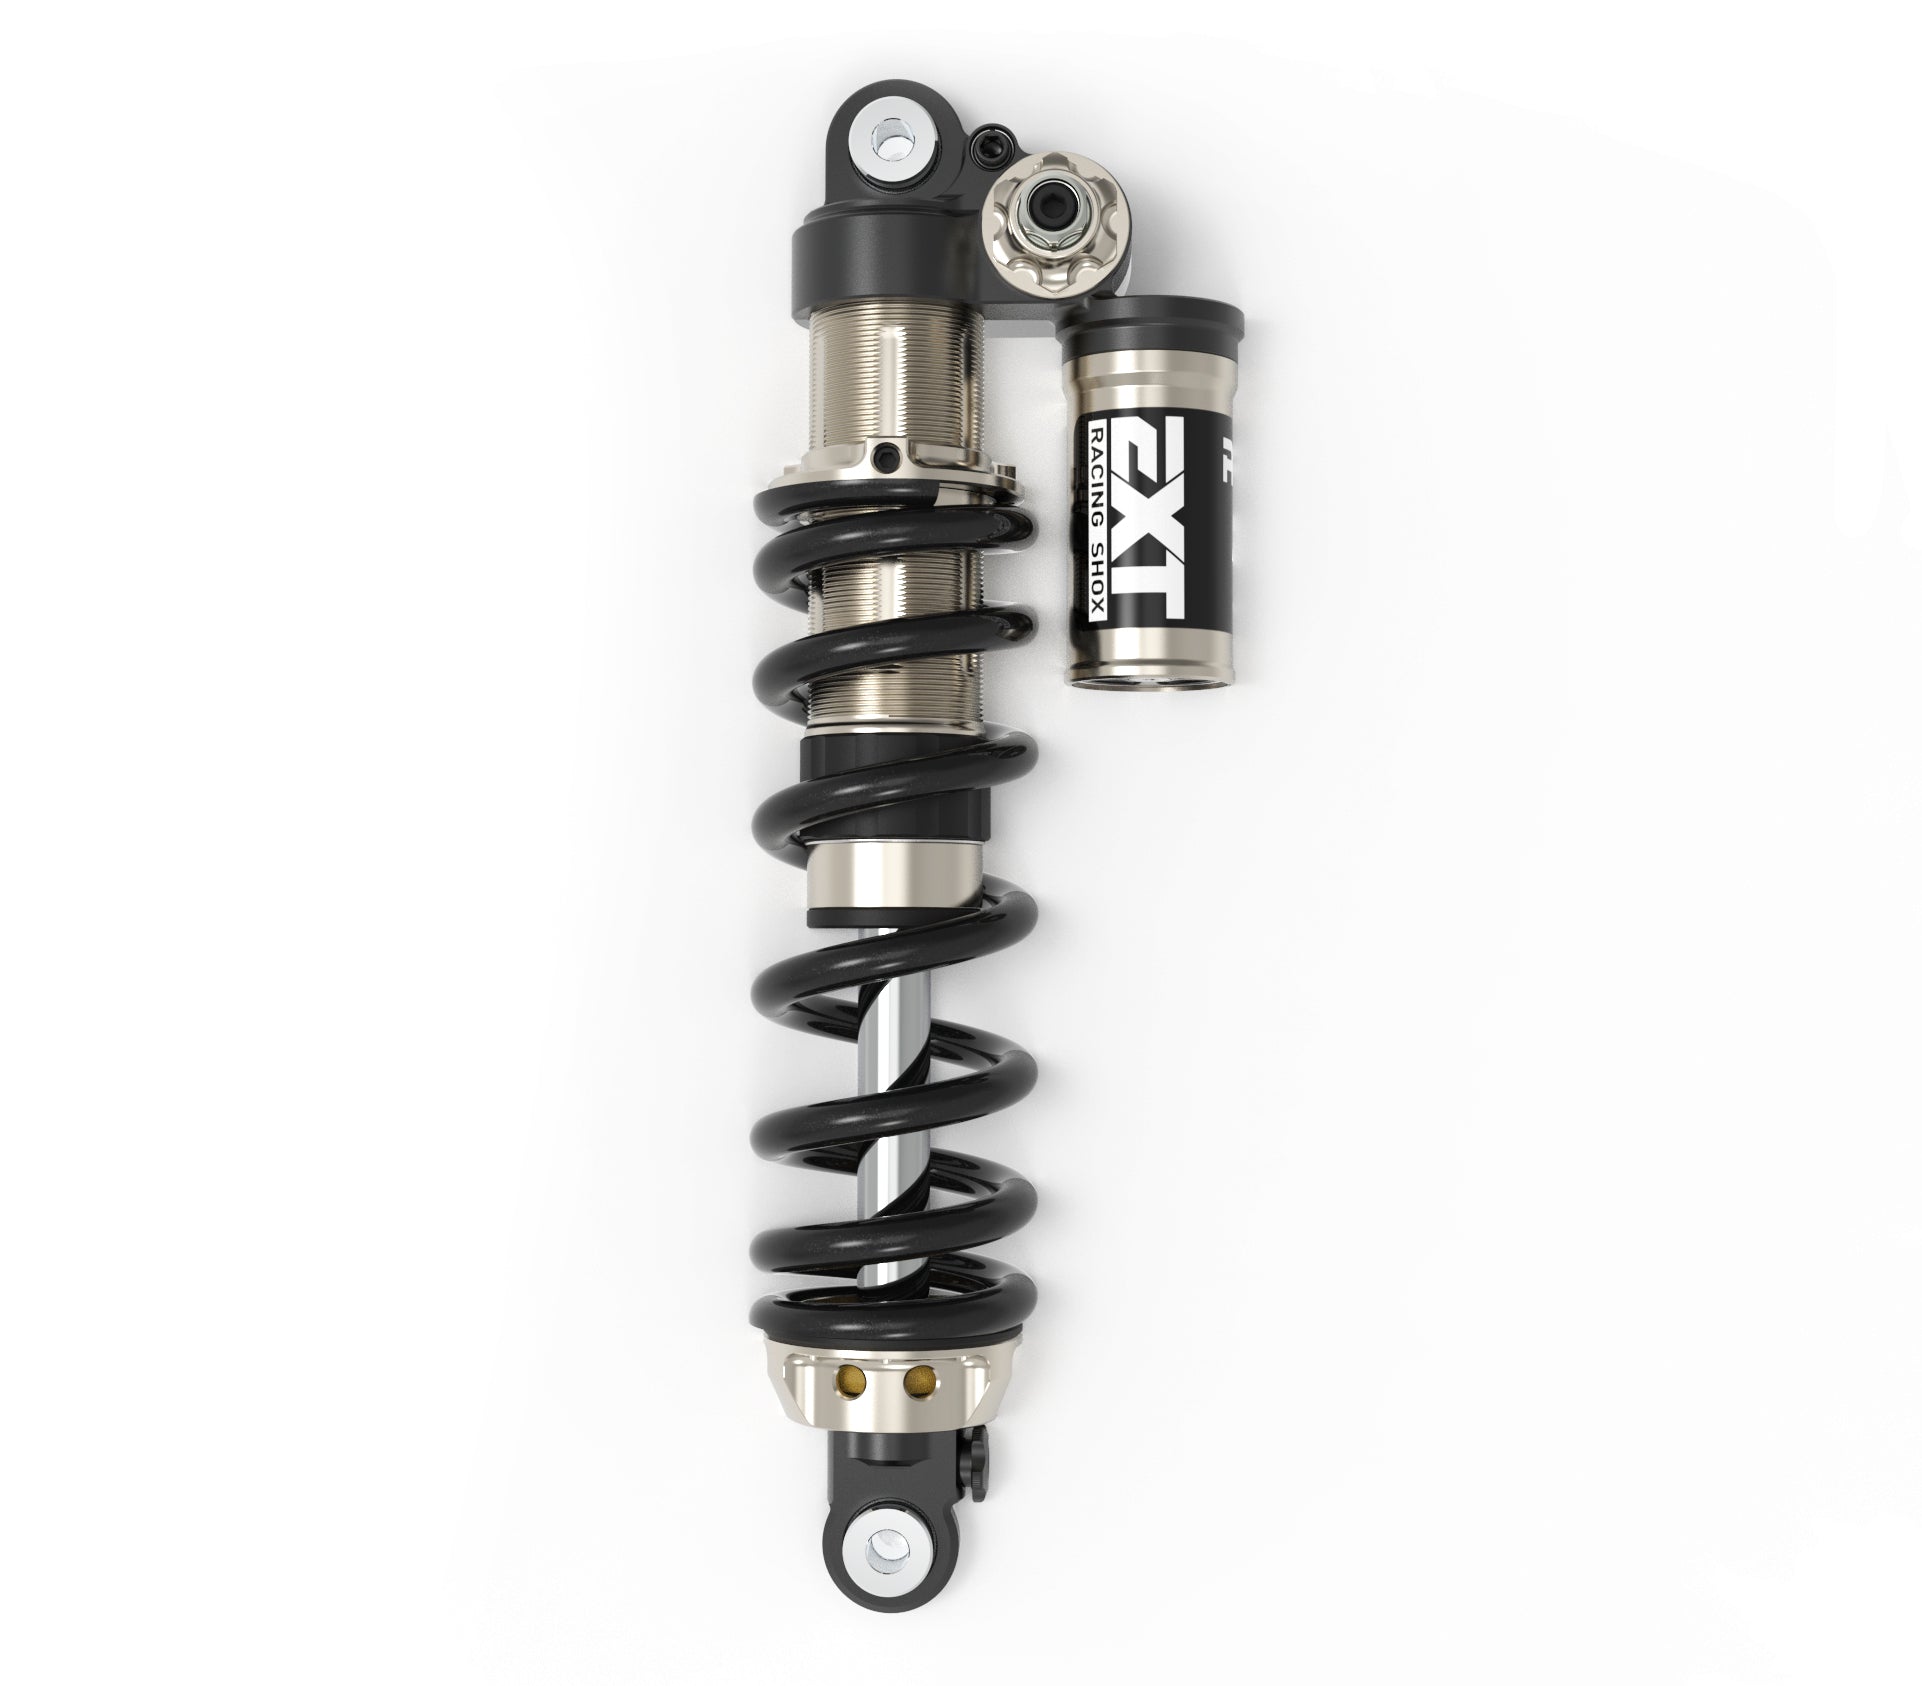 EXT Arma MX Rear Shock for Surron and Talaria